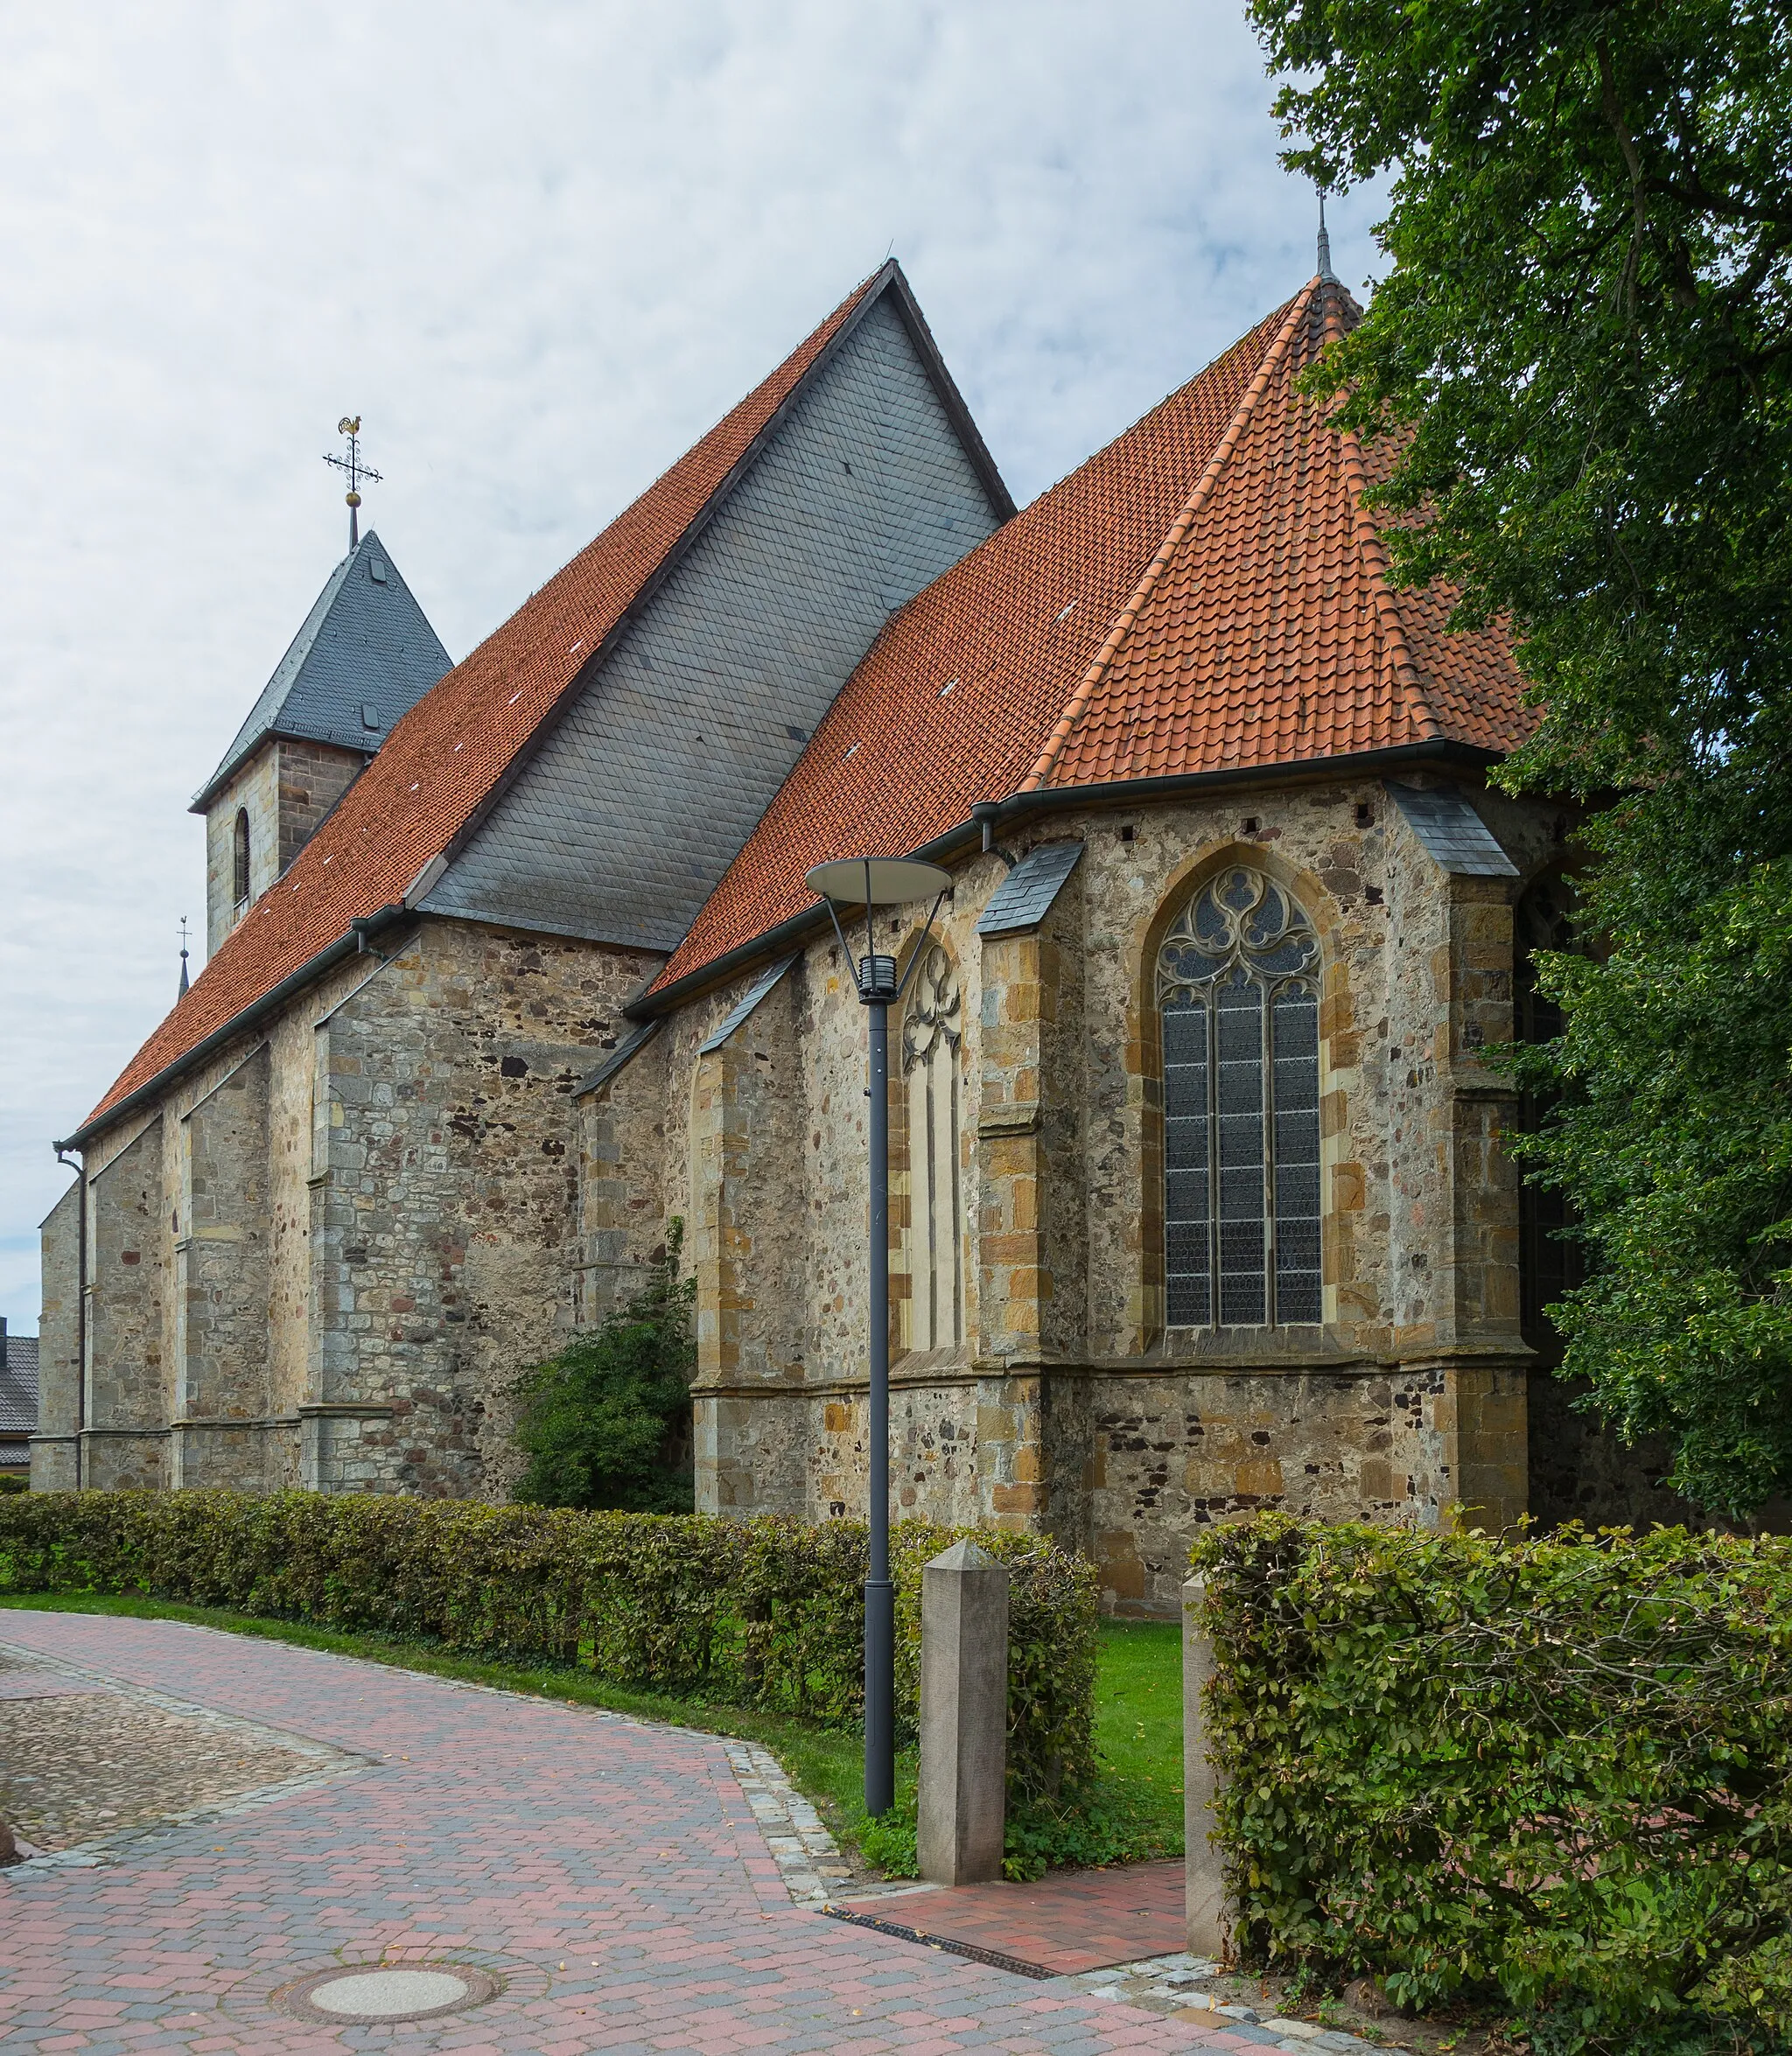 Photo showing: The Reformed Church of Lengerich, Landkreis Emsland, Lower Saxony, Germany. The building is a listed cultural heritage monument.